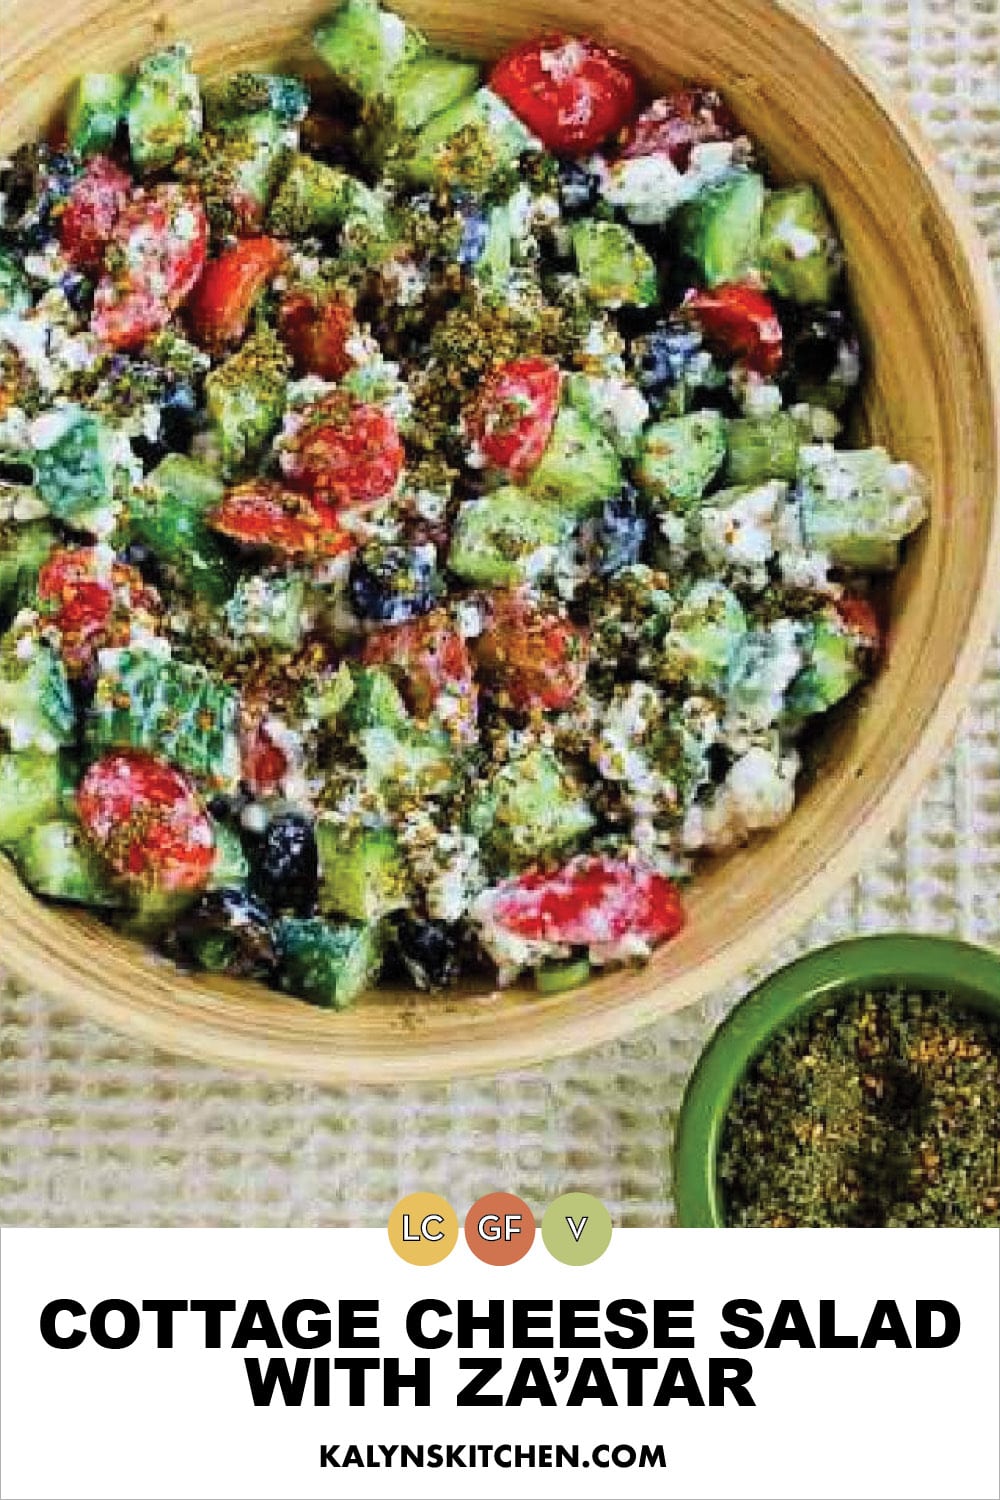 Pinterest image of Cottage Cheese Salad with Za'atar